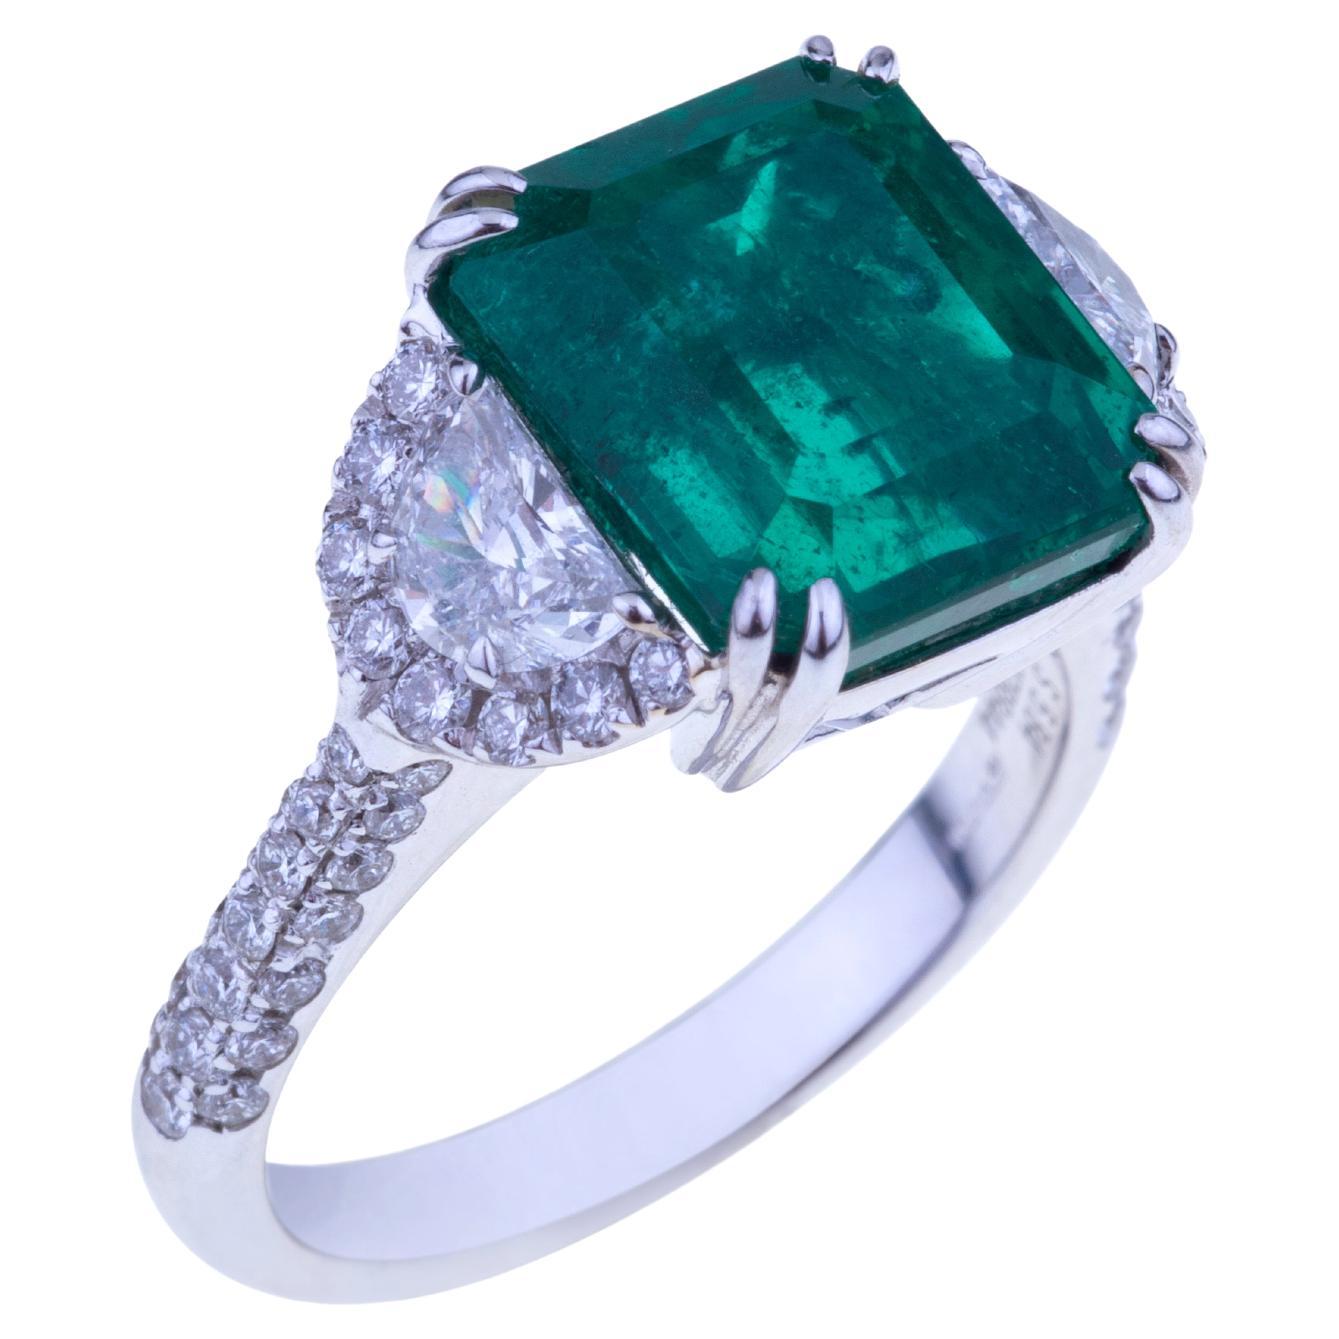 Stunning Emerald Ring ct. 5.84 with Diamonds. Unique stone. For Sale